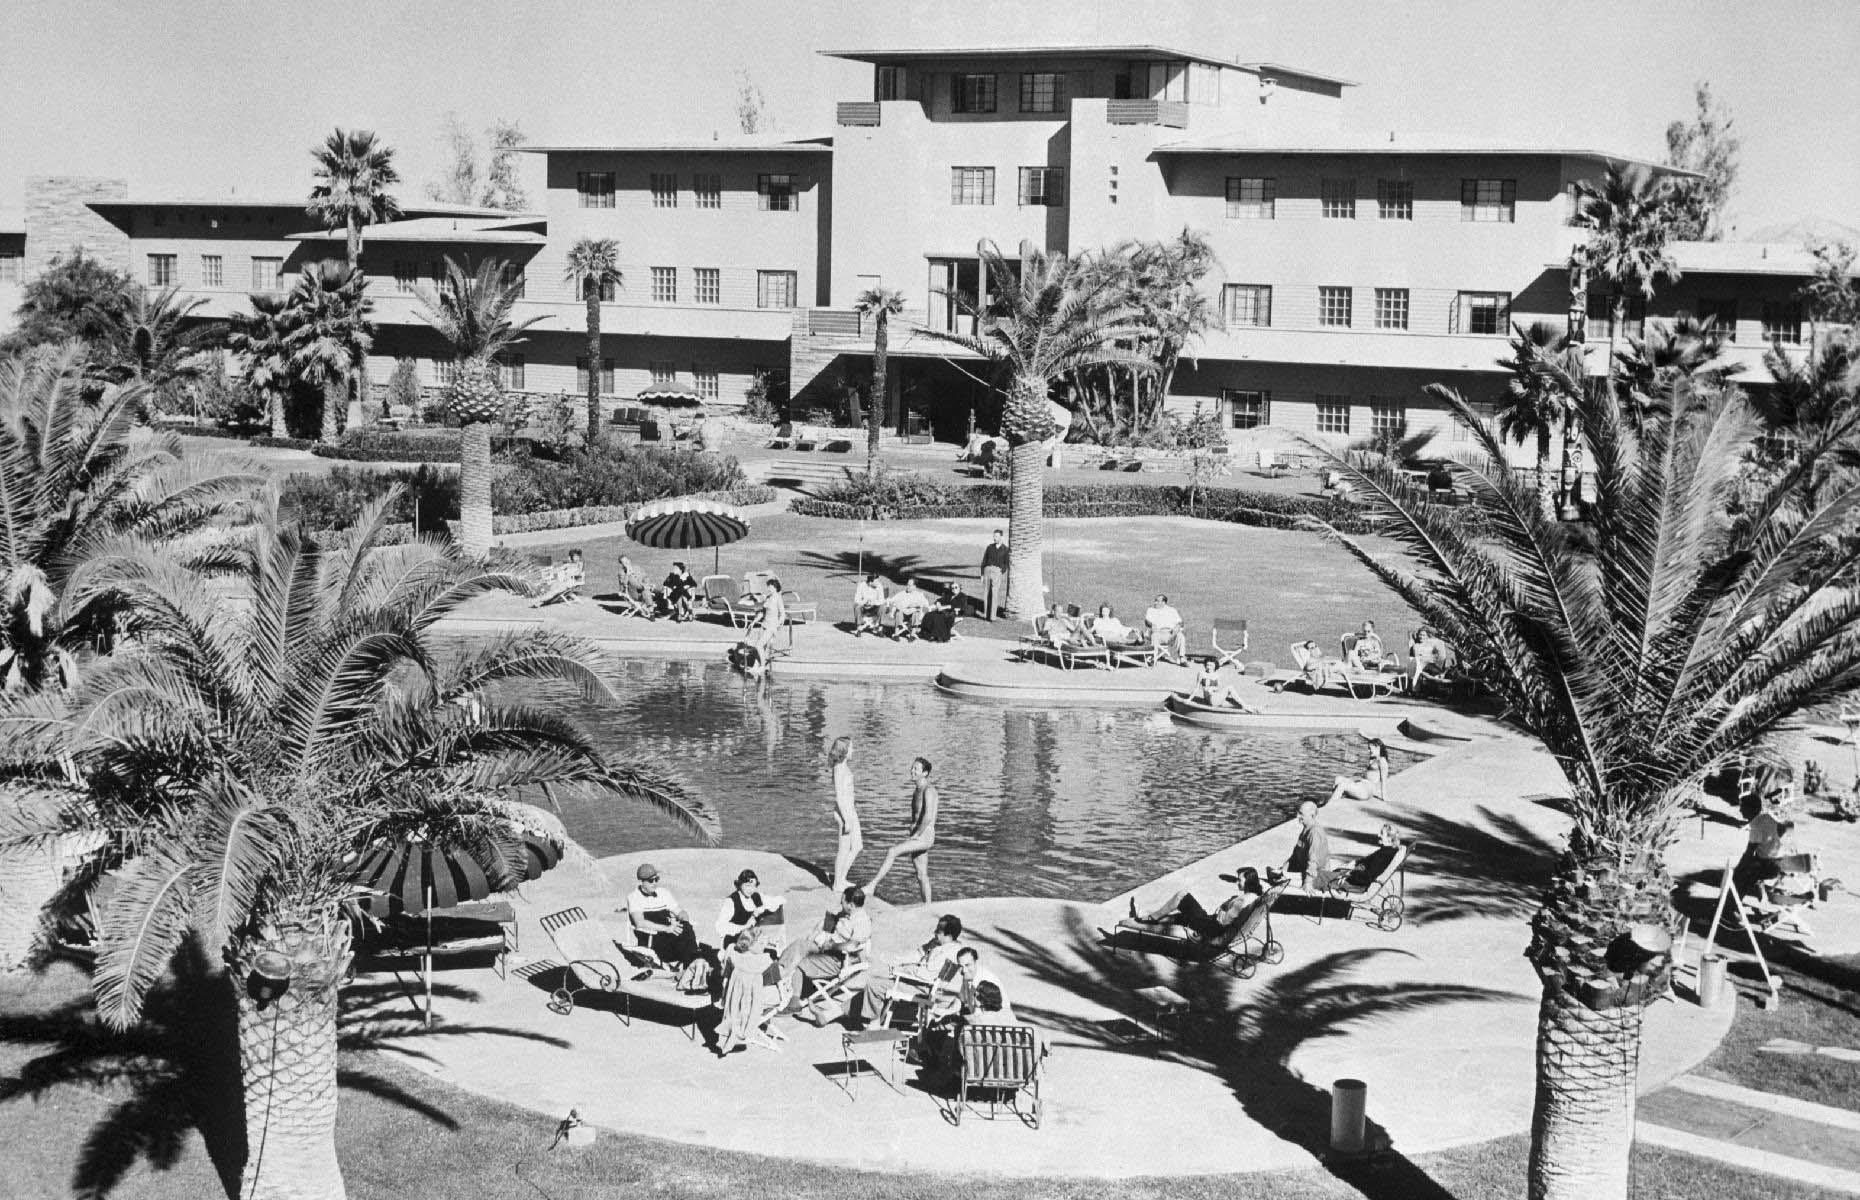 <p>A city that grew out of the desert thanks to the Union Pacific Railroad Project and gambling, Las Vegas started attracting vacationers as early as the 1930s, when the first gambling license was issued. A hotel boom followed during the 1940s – the legendary Flamingo Las Vegas (still in operation) was one of the ritzy hotels to open during this period. Then tipped as a "playground of the elite", the hotel boasted a palm-dotted patio, a vast pool and plush accommodations. This aerial shot was taken in 1949 and sees glamorous vacationers sun themselves beside the water. </p>